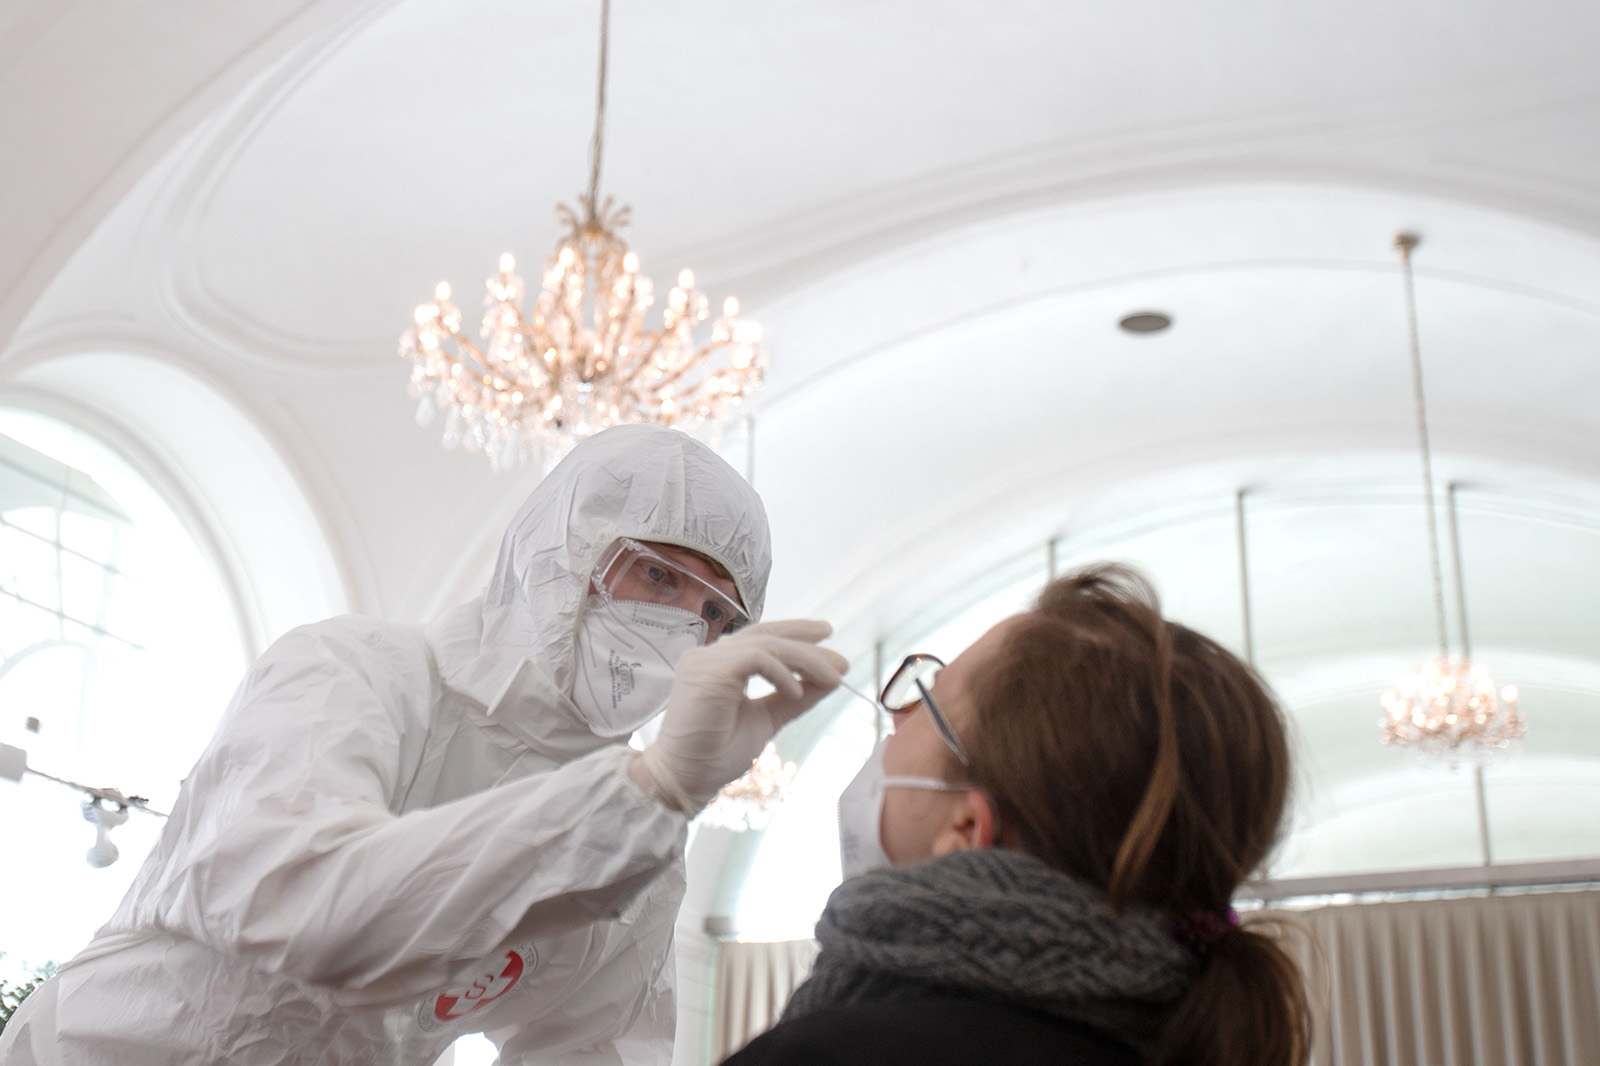 A health worker takes a coronavirus antigen rapid test swab at the new coronavirus test center in the Orangery of the Schoenbrunn Palace on February 4 in Vienna, Austria.